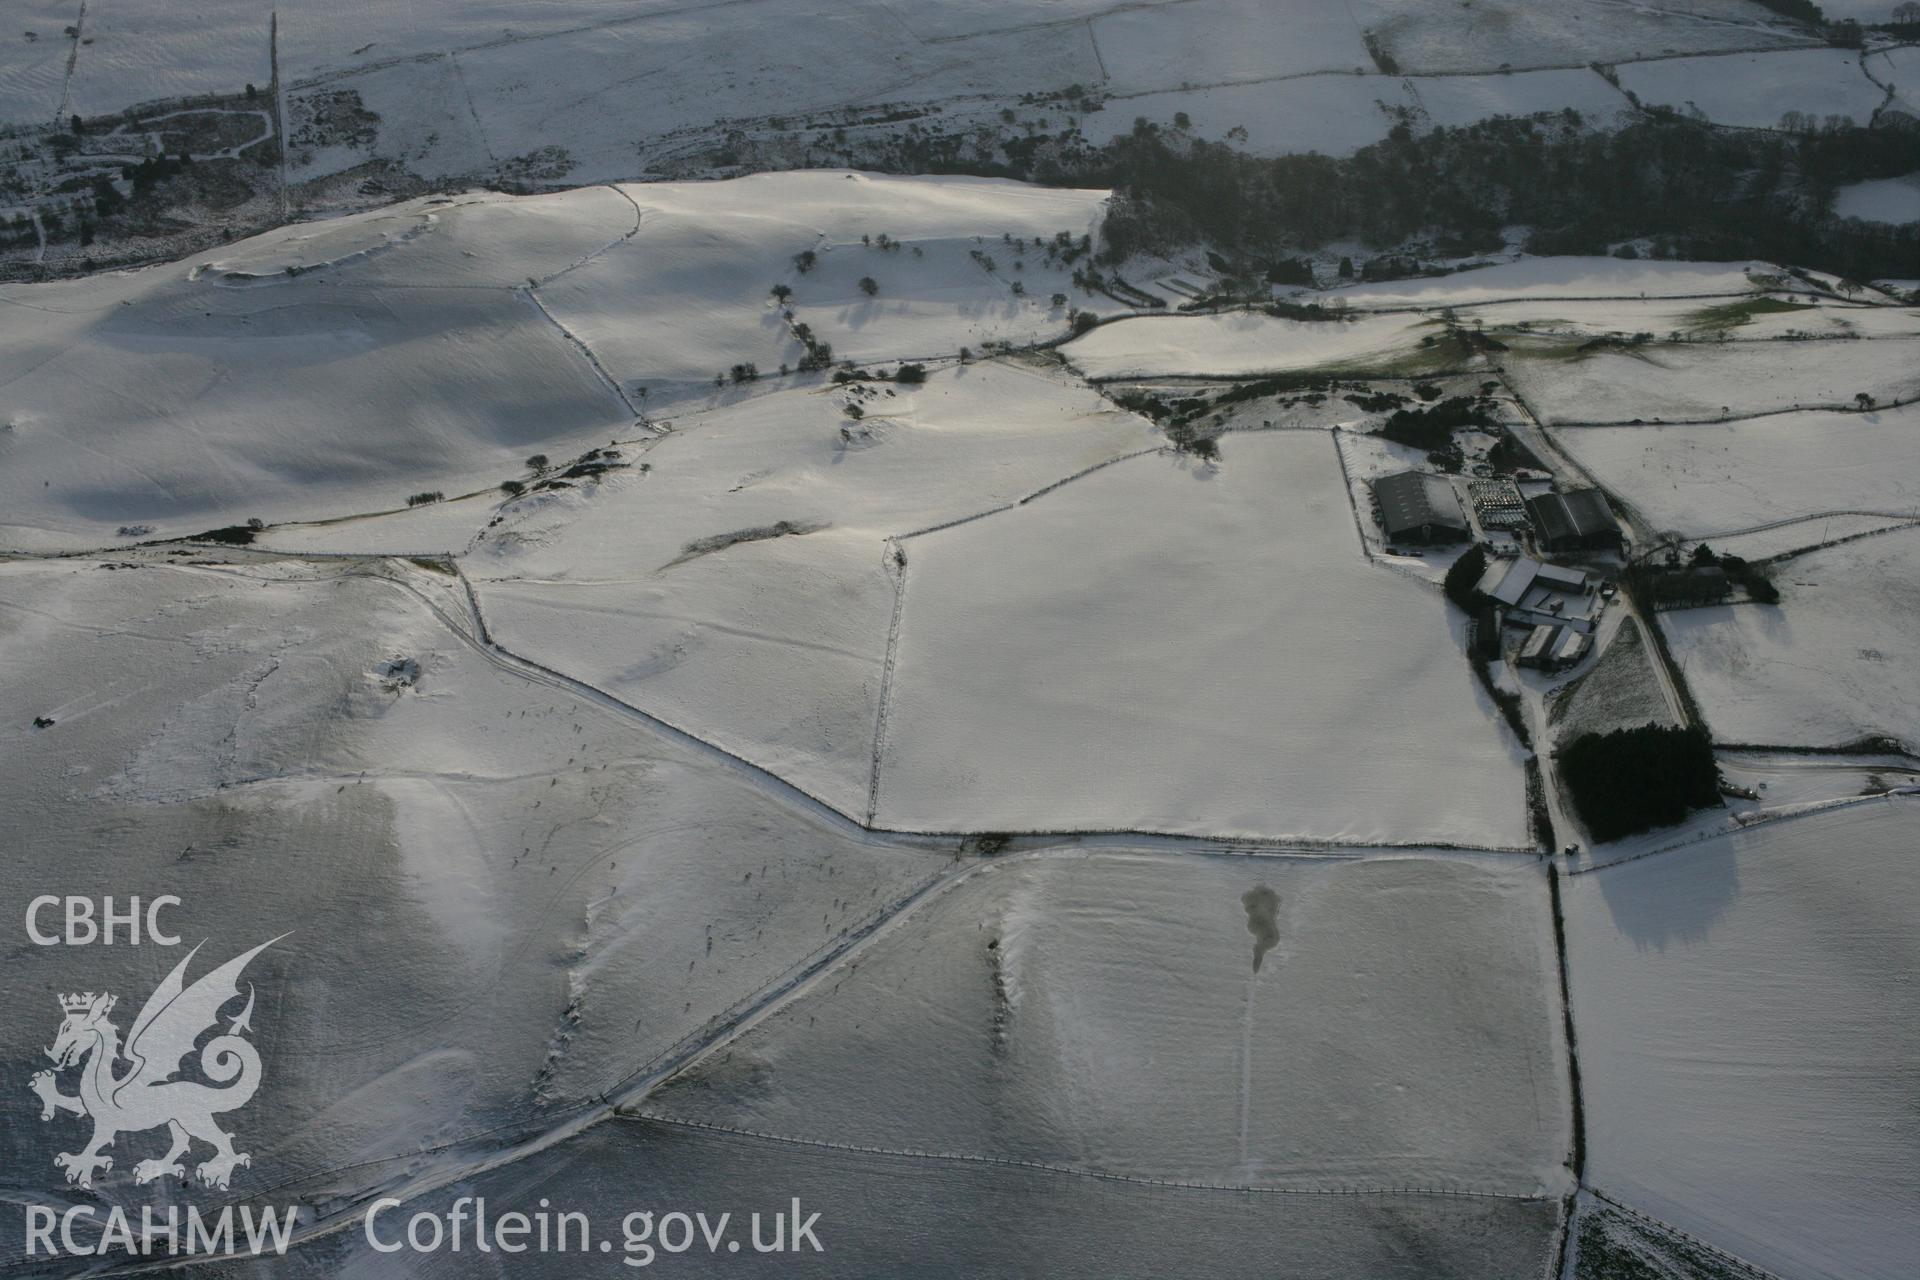 RCAHMW colour oblique photograph of Pen y Castell hillfort, winter landscape from the north. Taken by Toby Driver on 02/12/2010.